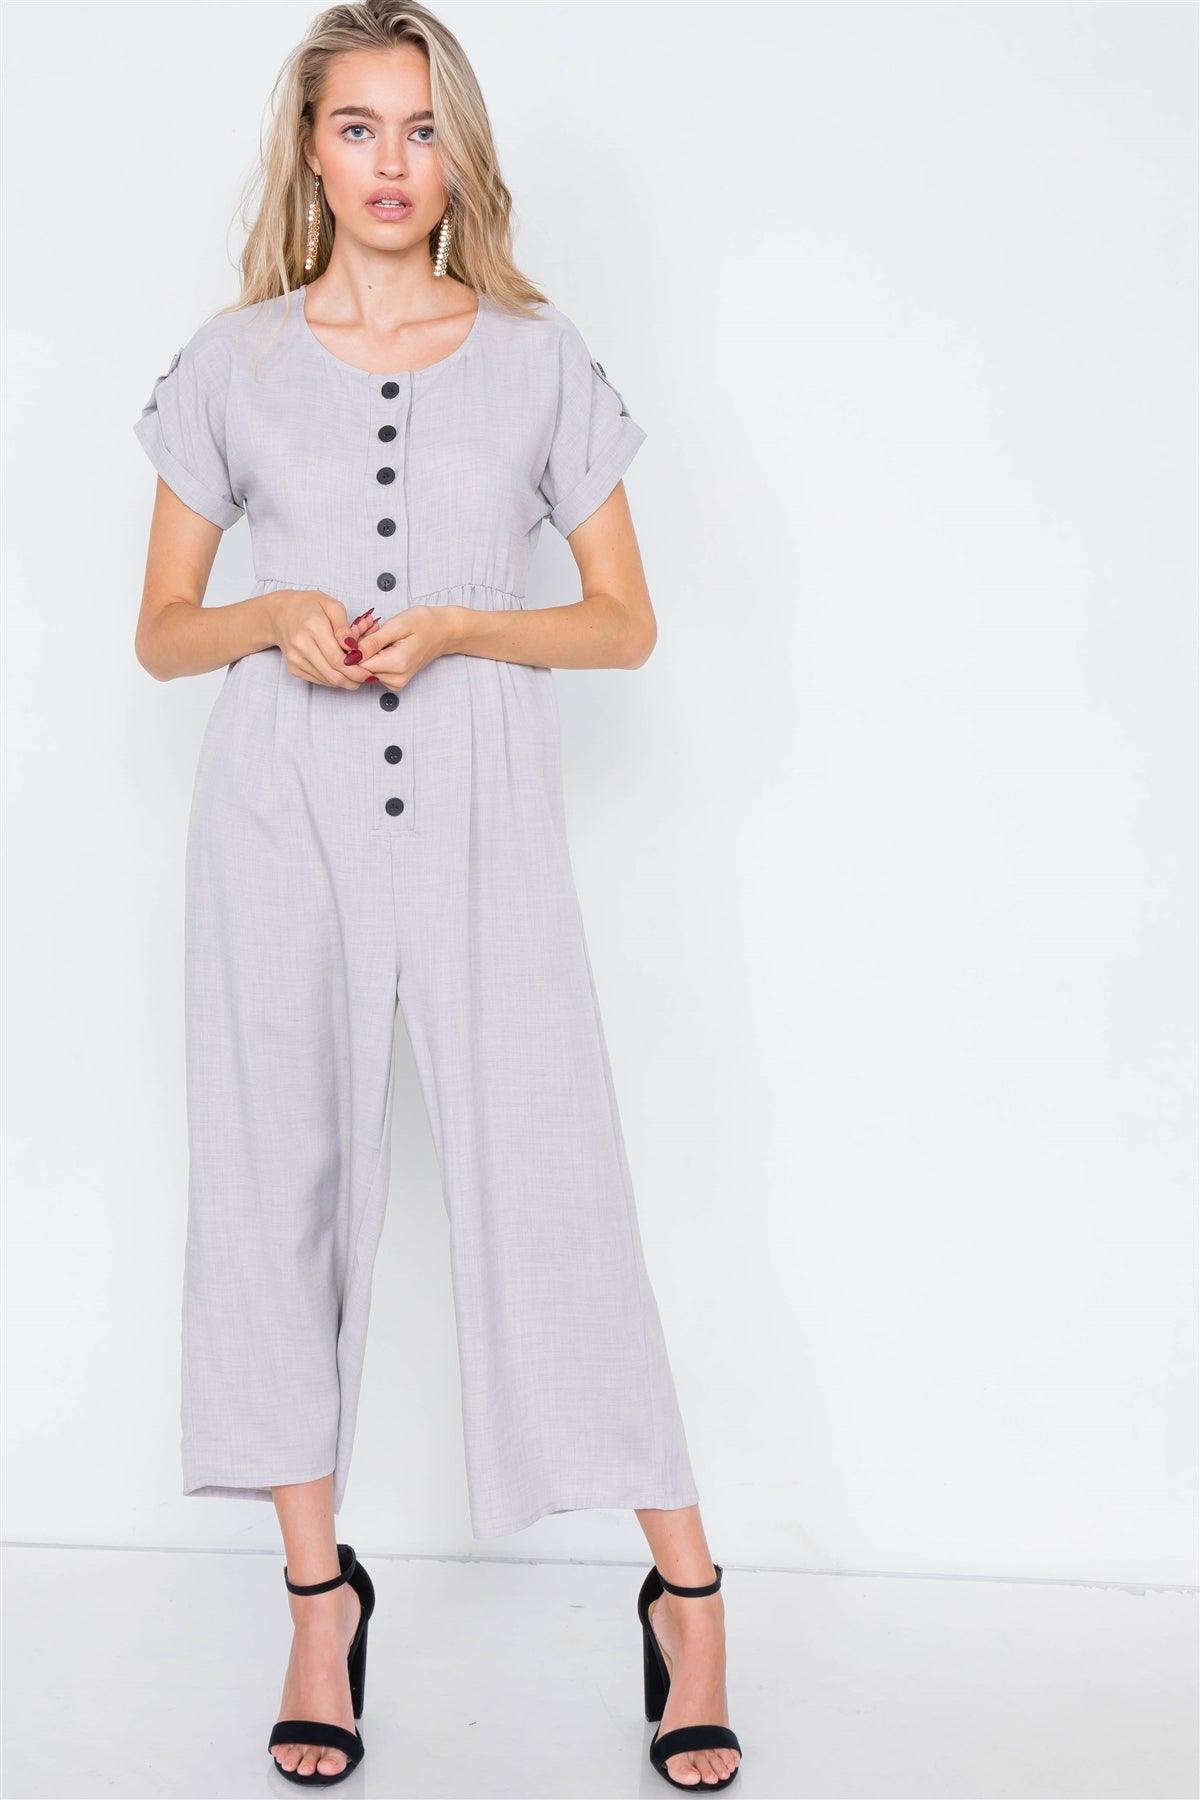 Solid Grey Flared Ankle Gaucho Jumpsuit /2-2-2